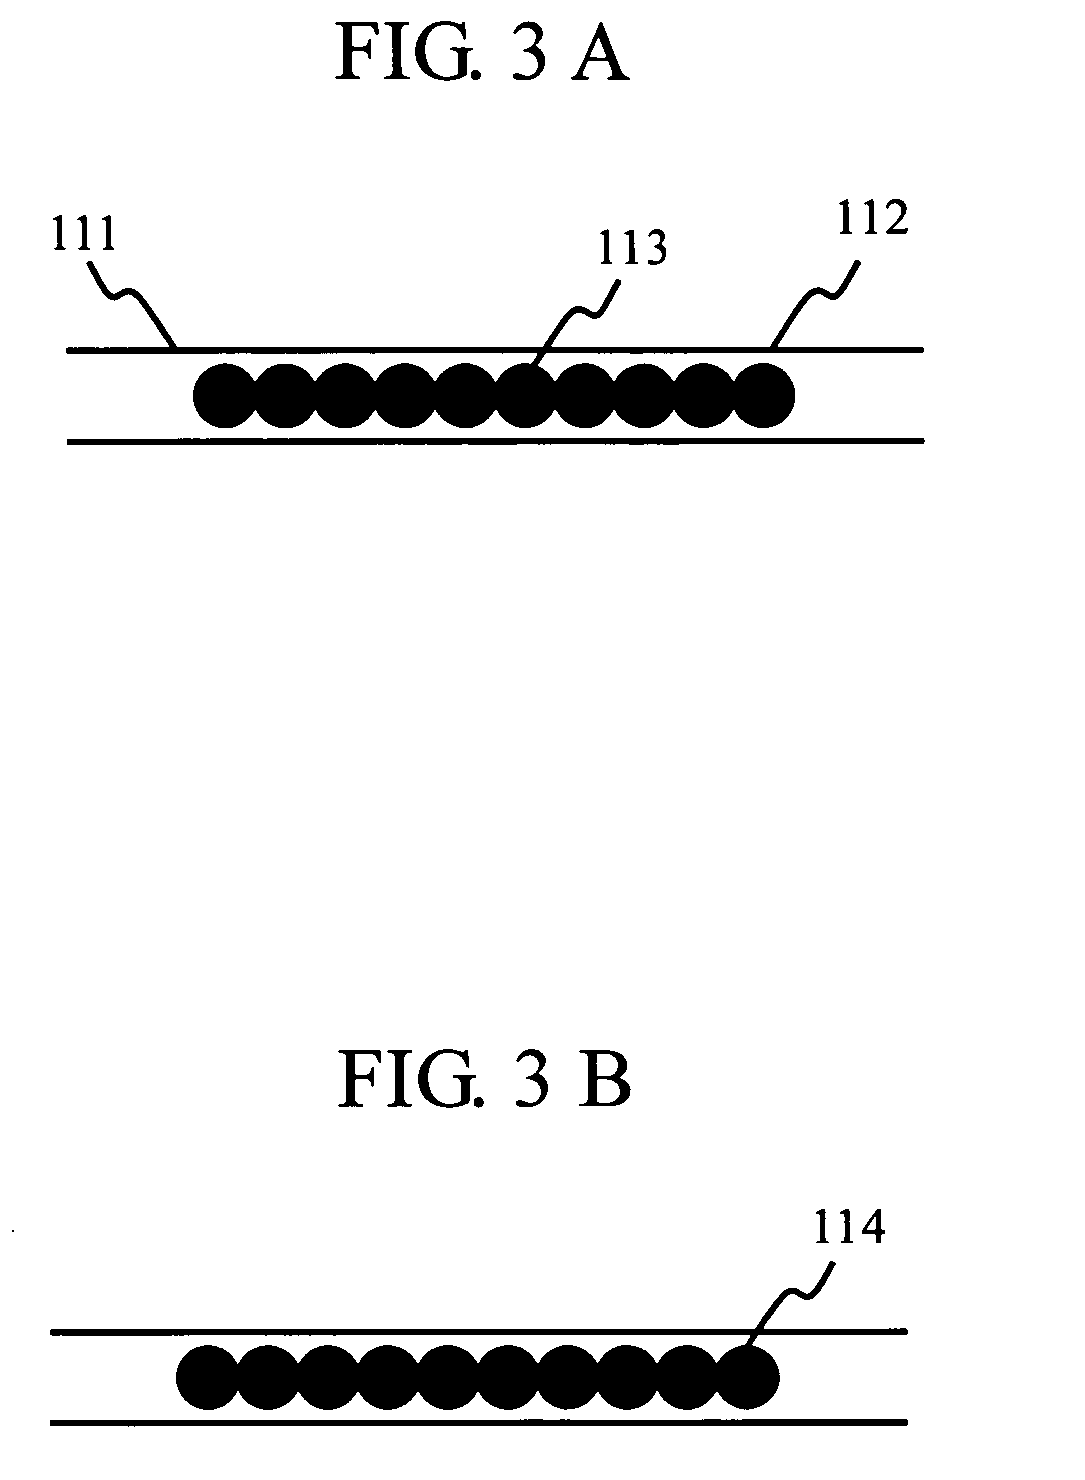 Method for detecting location of probe bead in capillary bead array